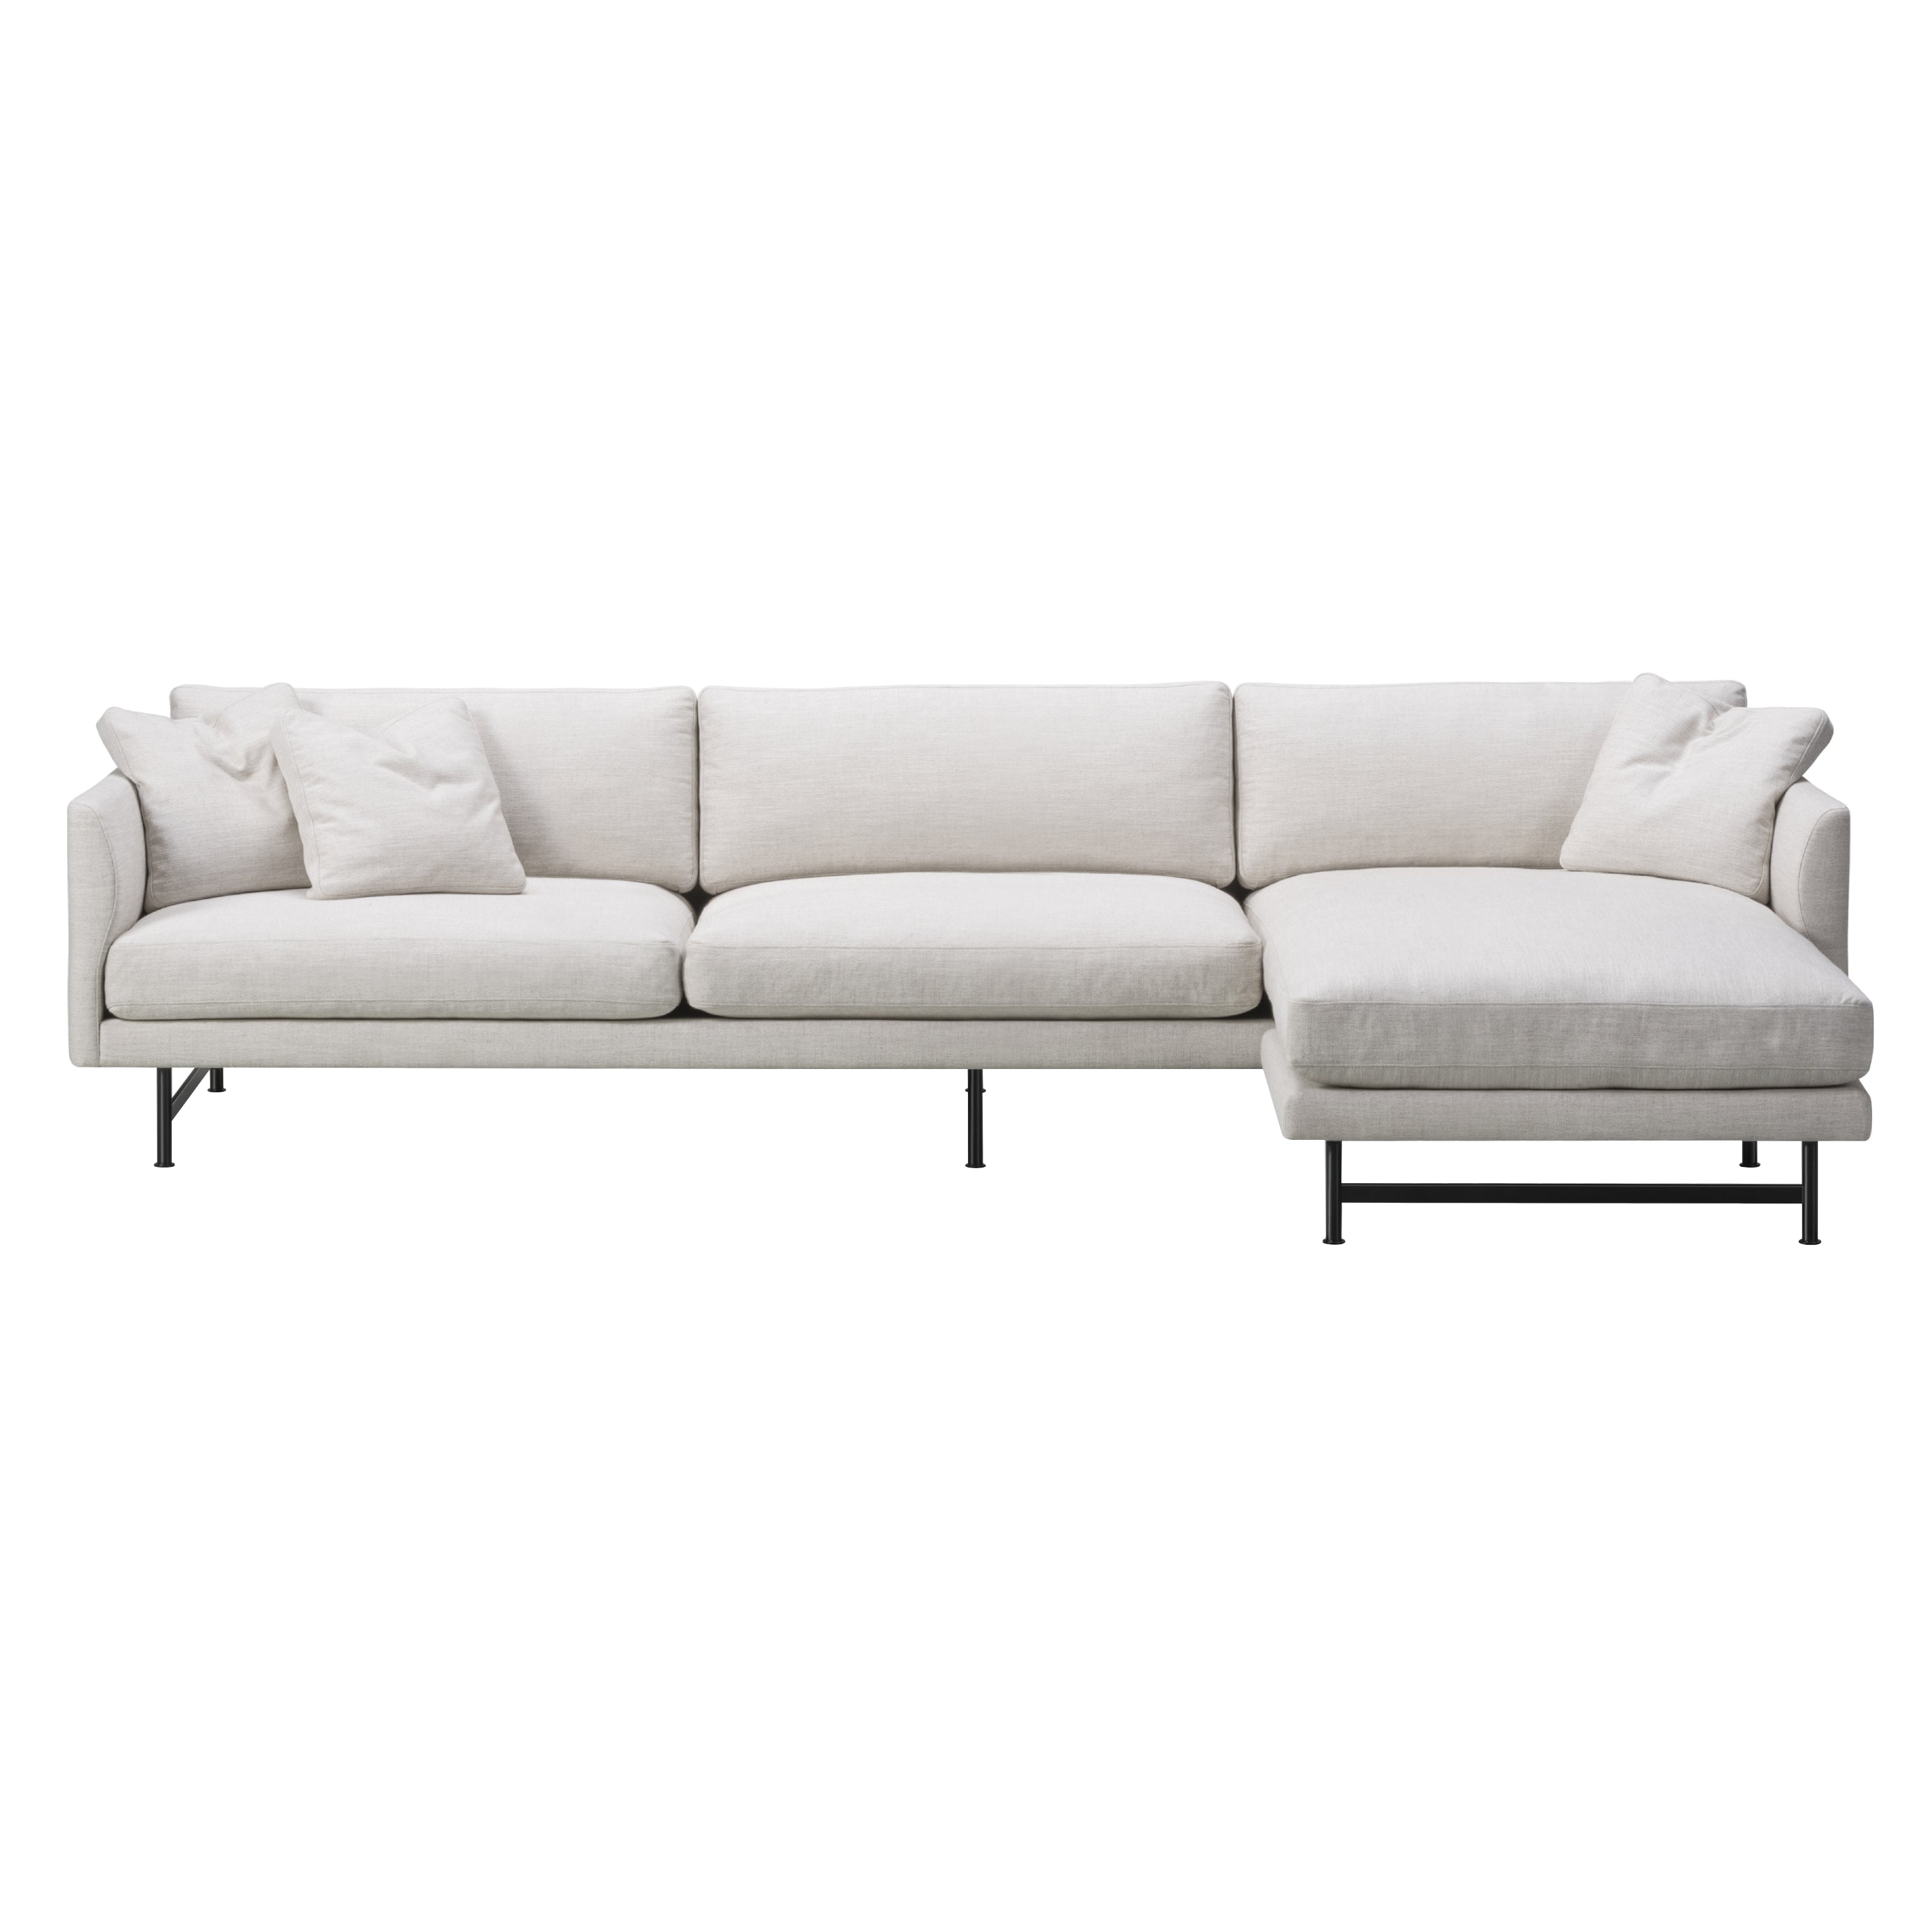 Calmo 3 Seater Chaise: Metal Base + Large - 116.1